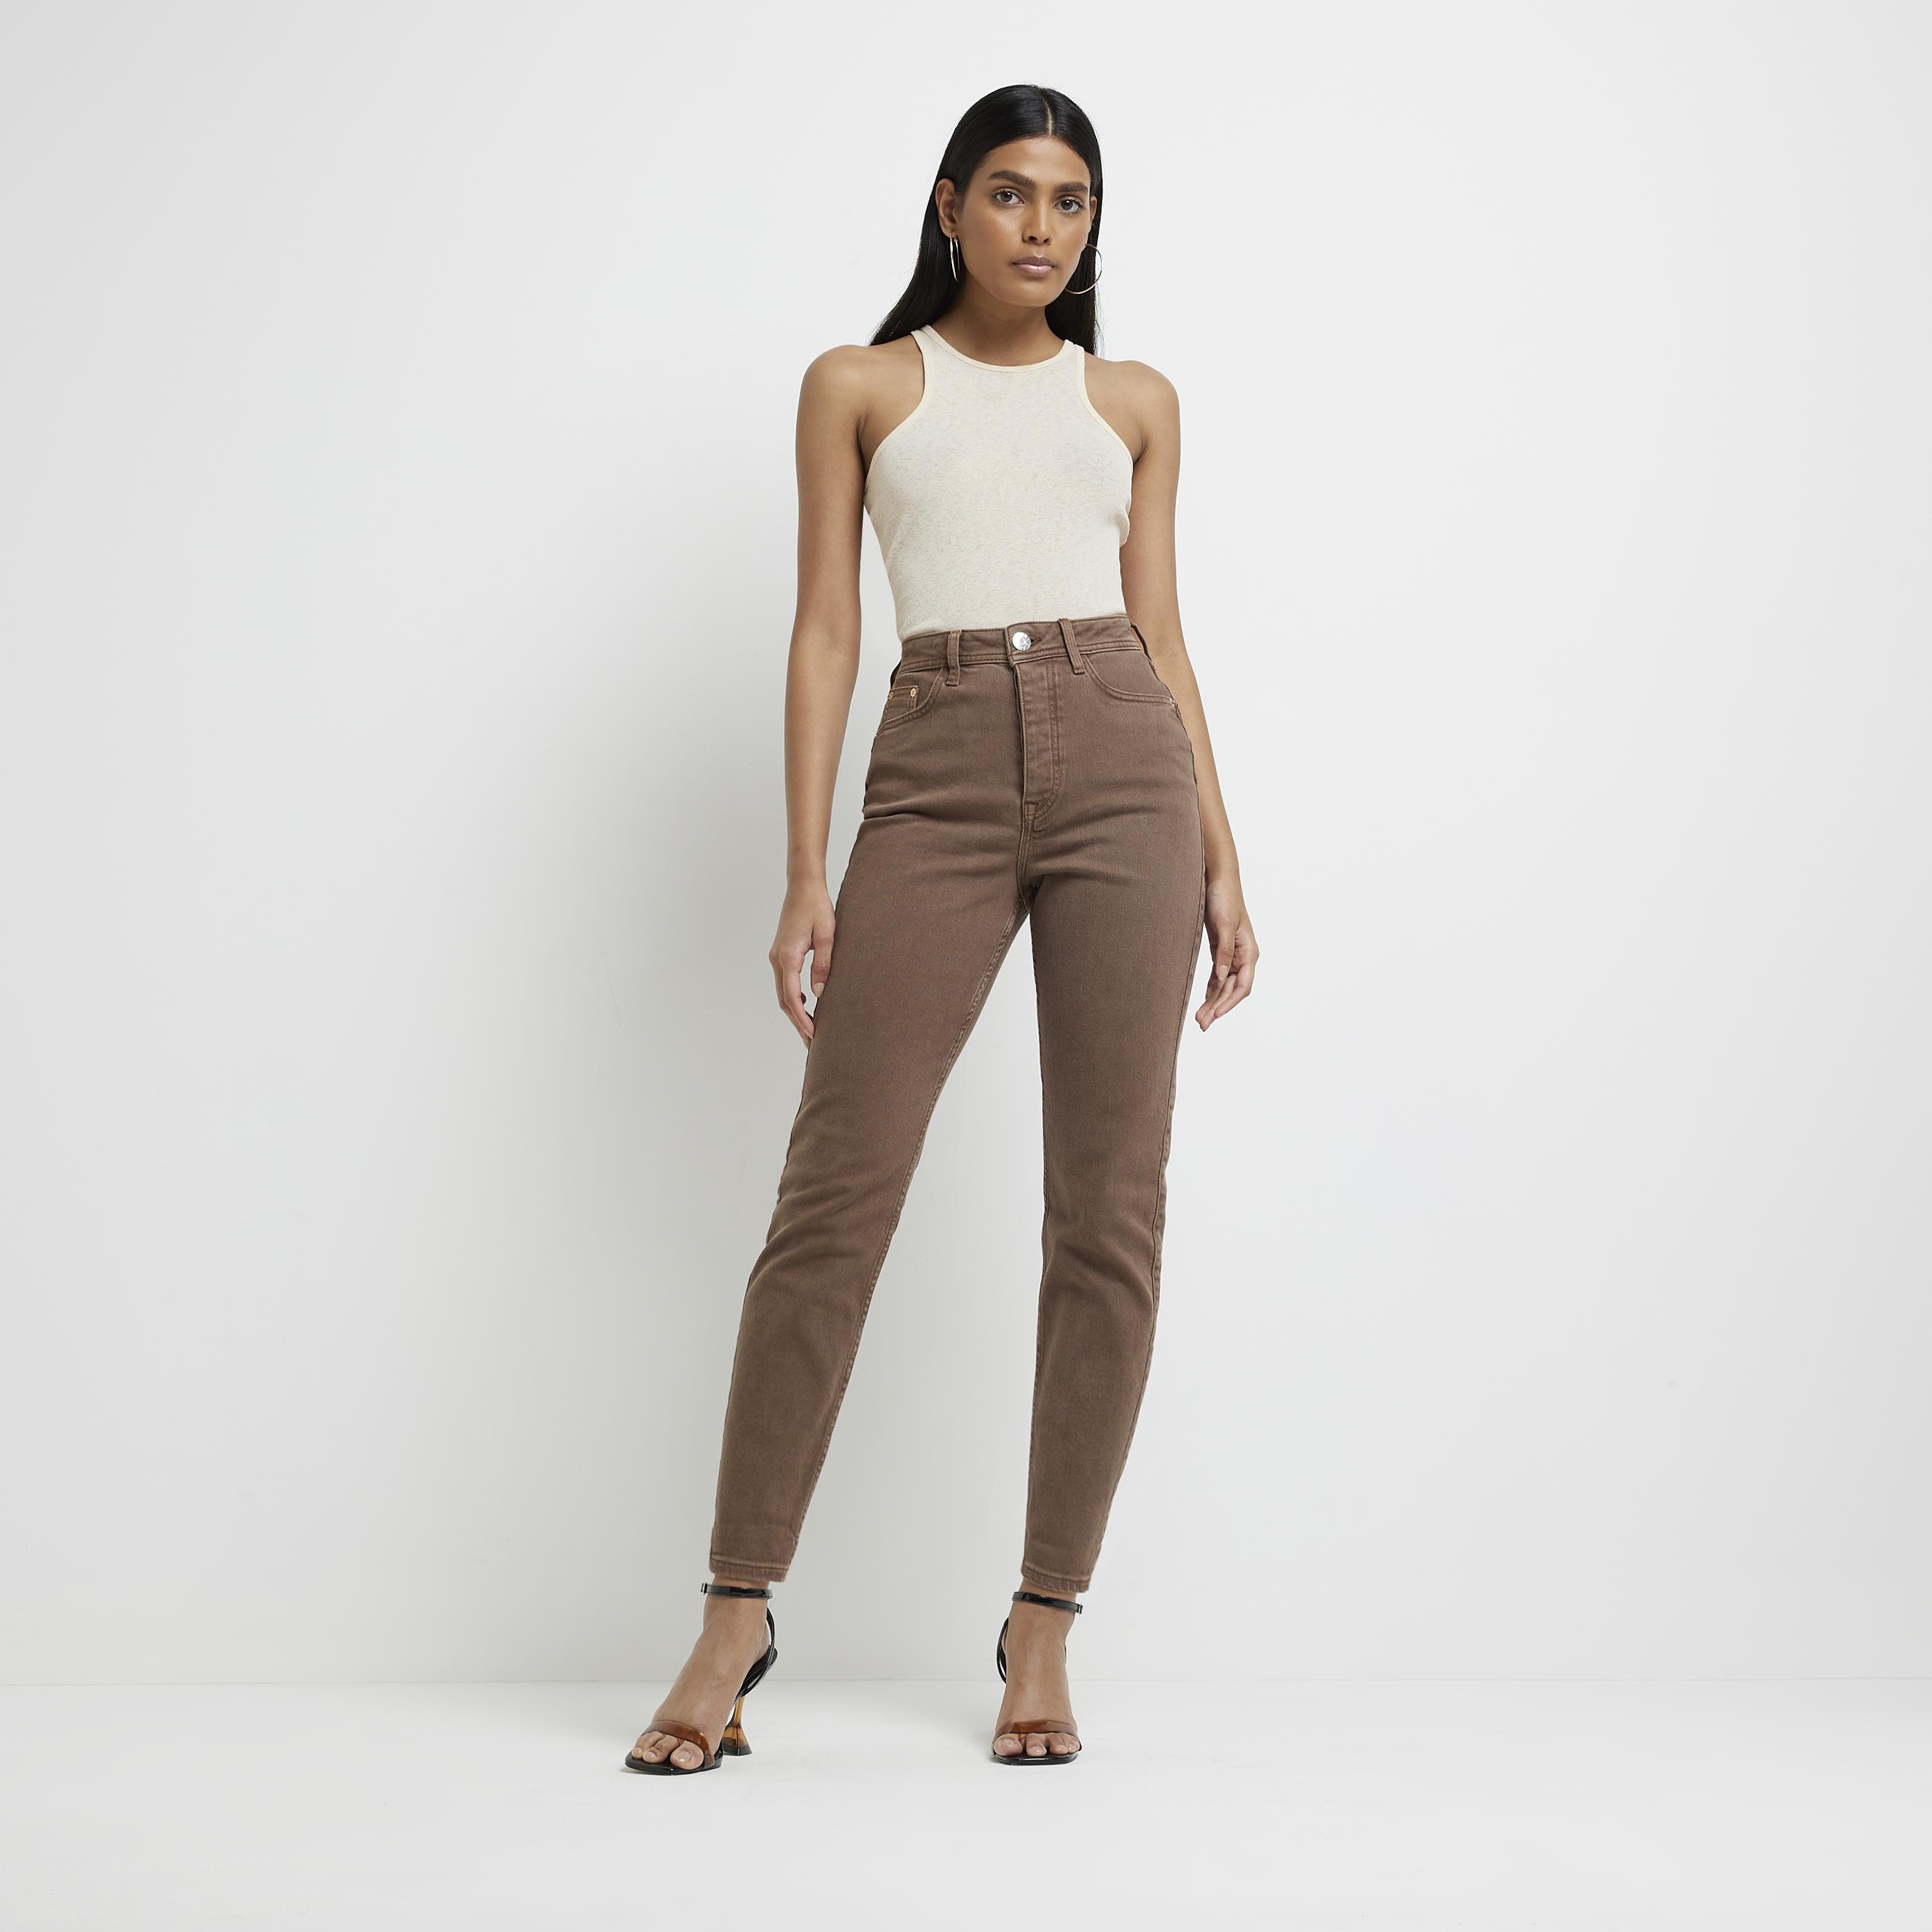 River Island Brown High Waisted Bum Sculpt Mom Jeans in Natural | Lyst UK